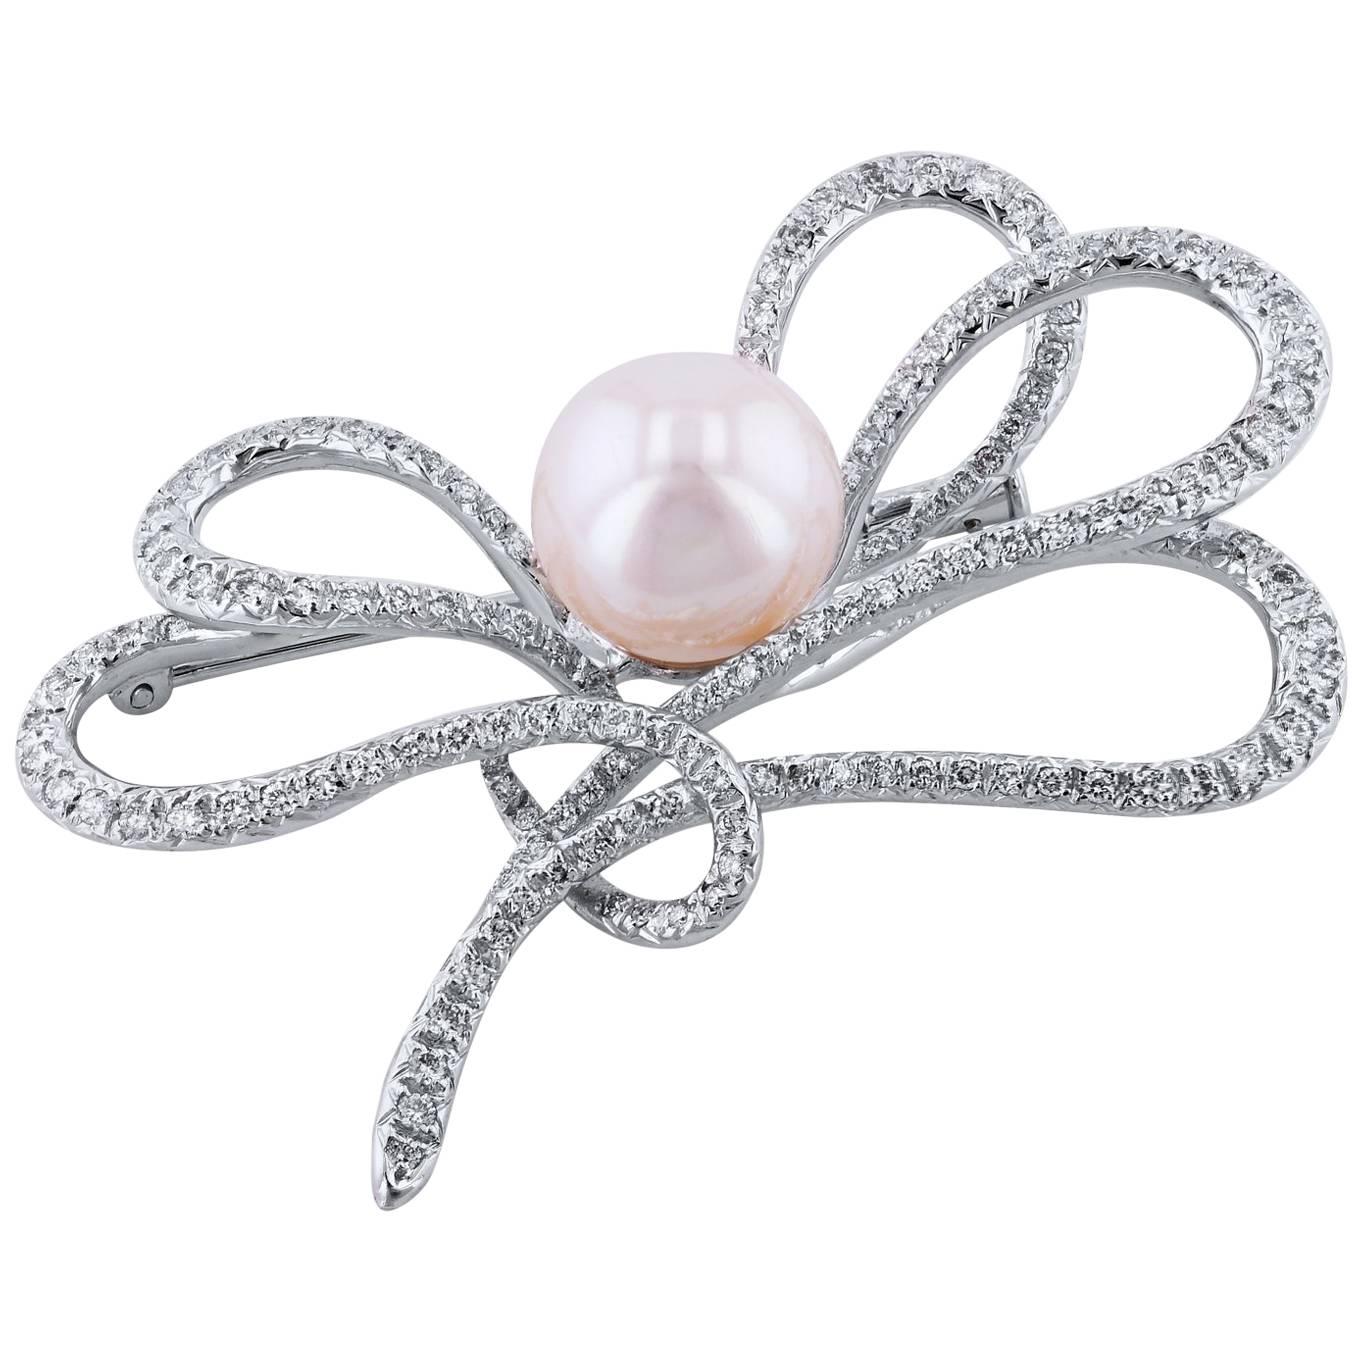 Diamond and White Pearl Swirl Pendant with Brooch Pin